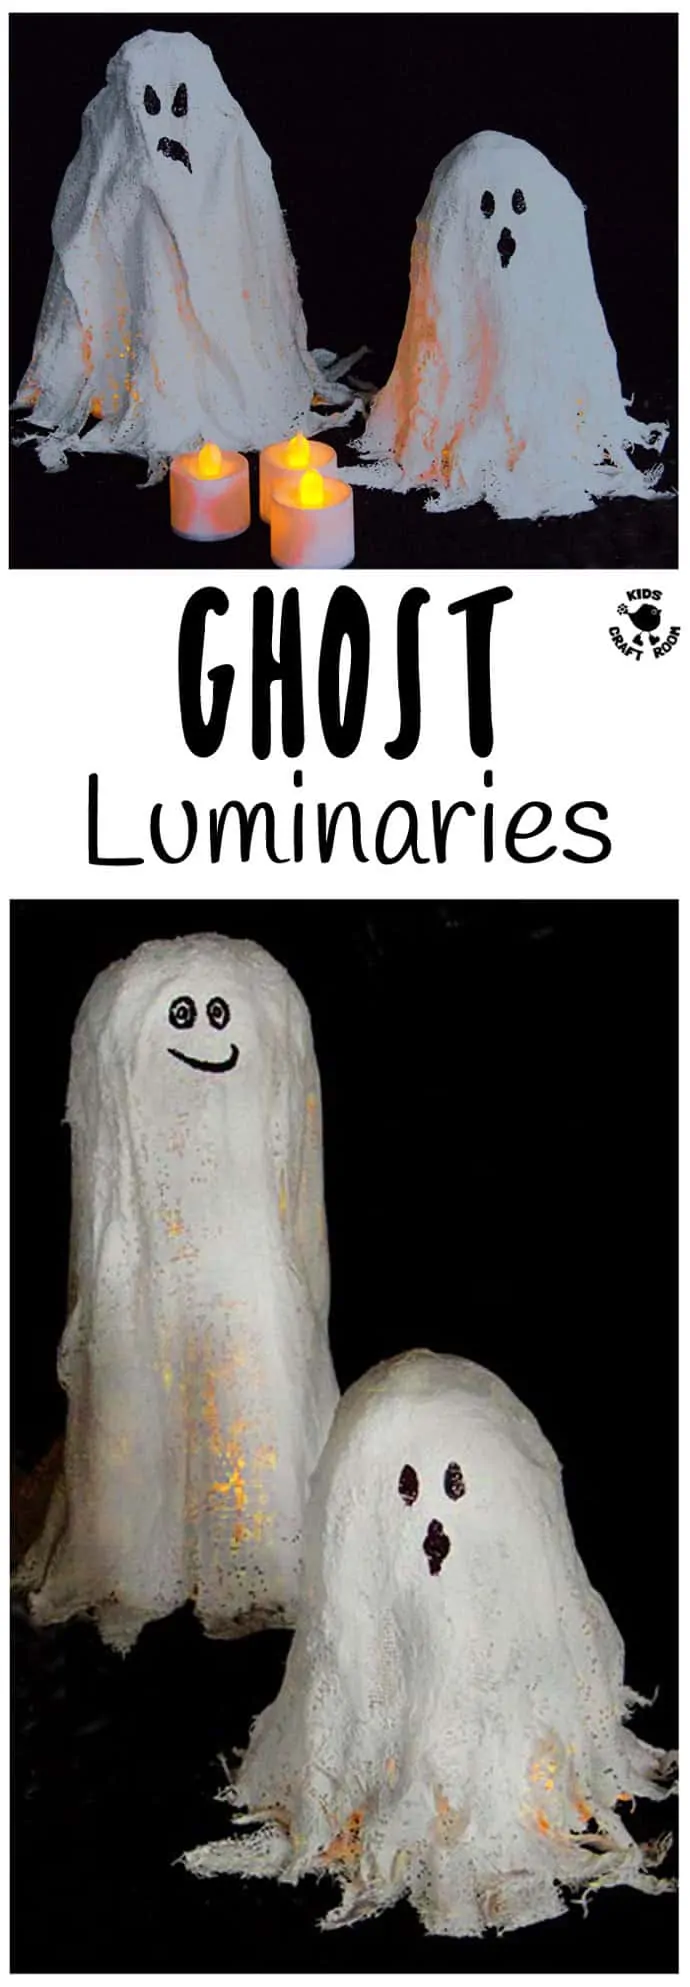 GHOST LUMINARIES -Make DIY Mod Roc Ghost Lights. A fun and different Halloween lantern craft idea great for little and big kids.